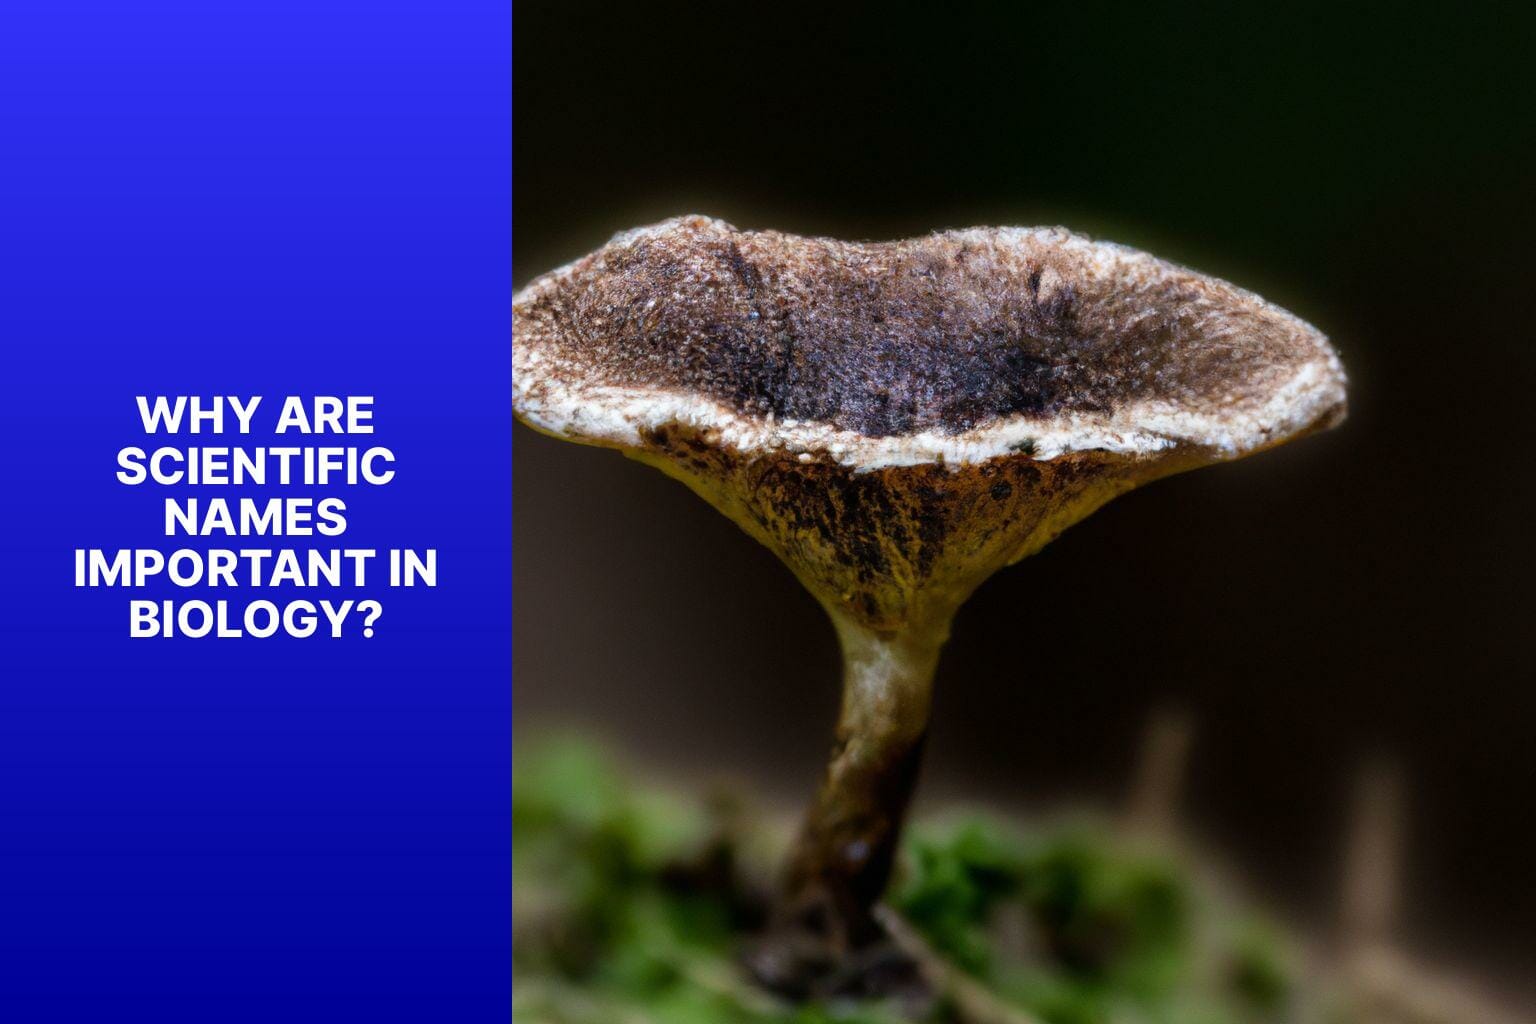 Why Are Scientific Names Important in Biology? - scientific name for mushroom 